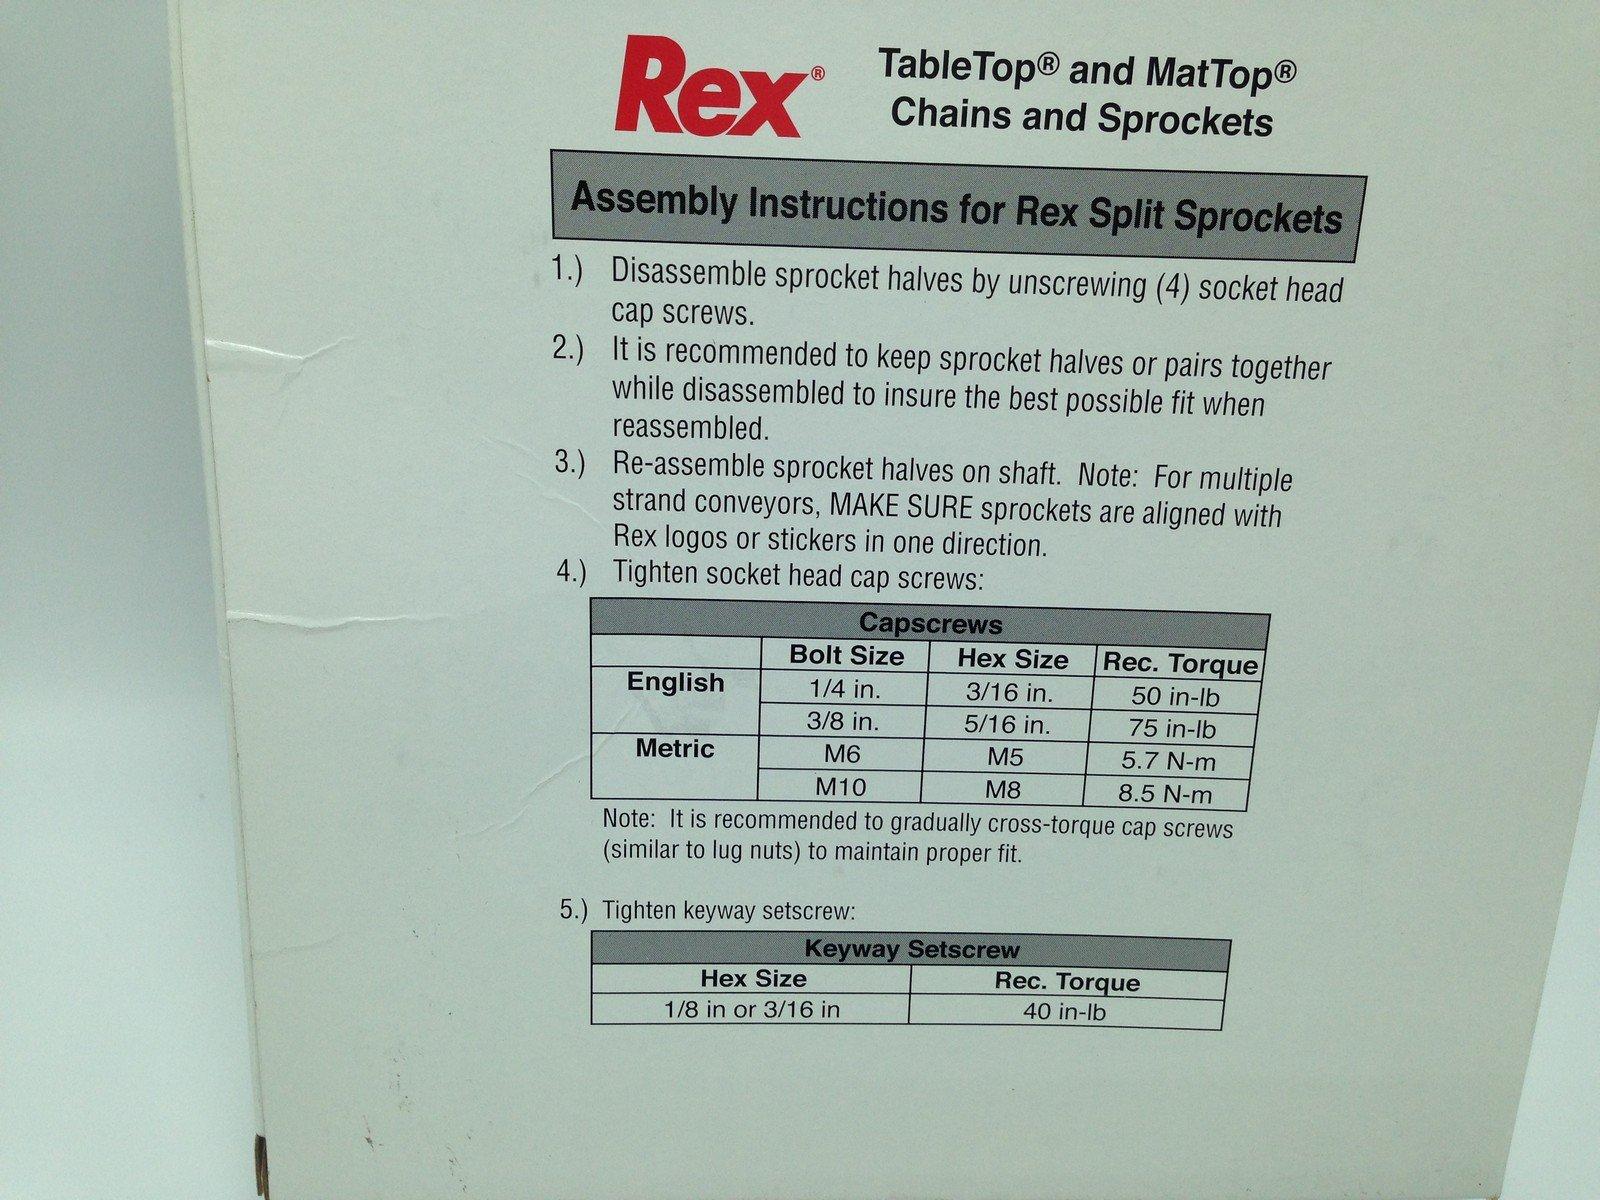 REXNORD NS1500-32T_1-1/4IN TABLETOP SPROCKET PN 10028523 